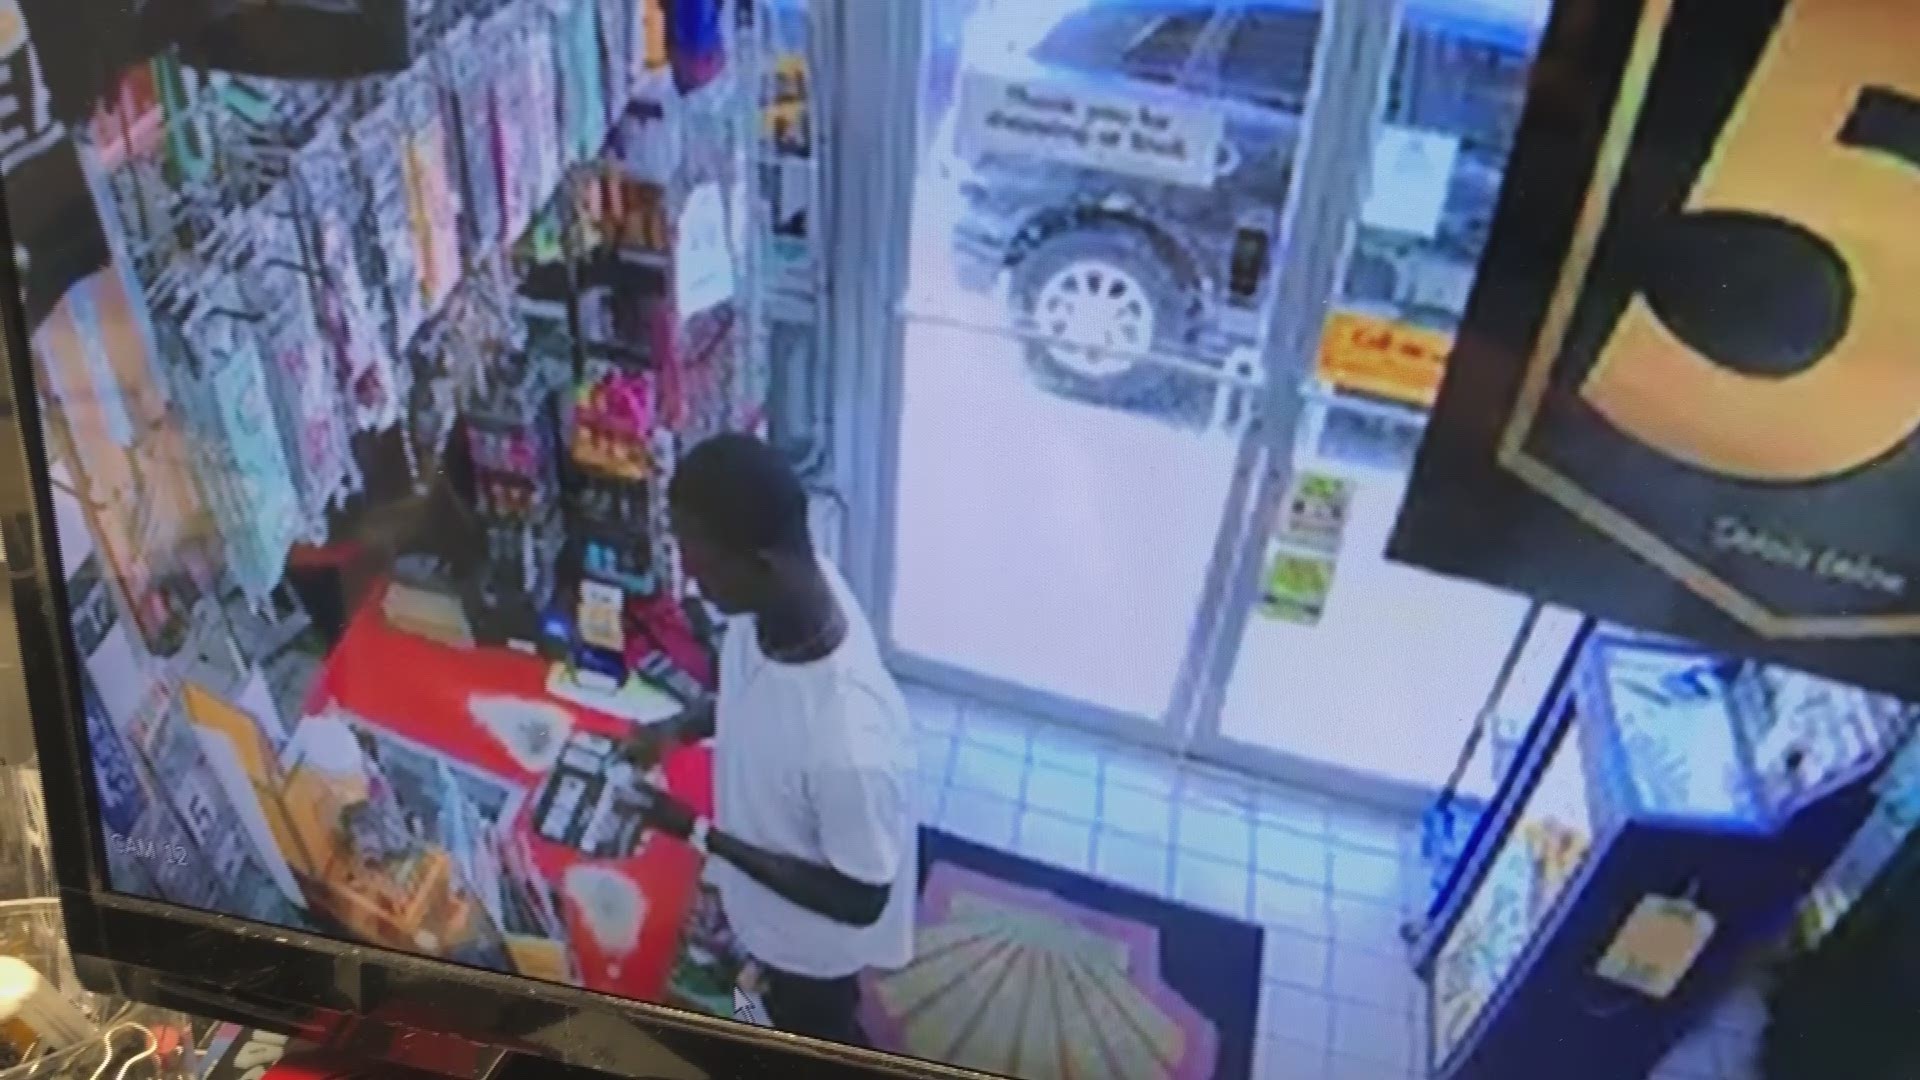 Surveillance video of Keeven Robinson at the Jefferson Shell Station prior to his chase and death after a struggle with Jefferson Parish deputies.